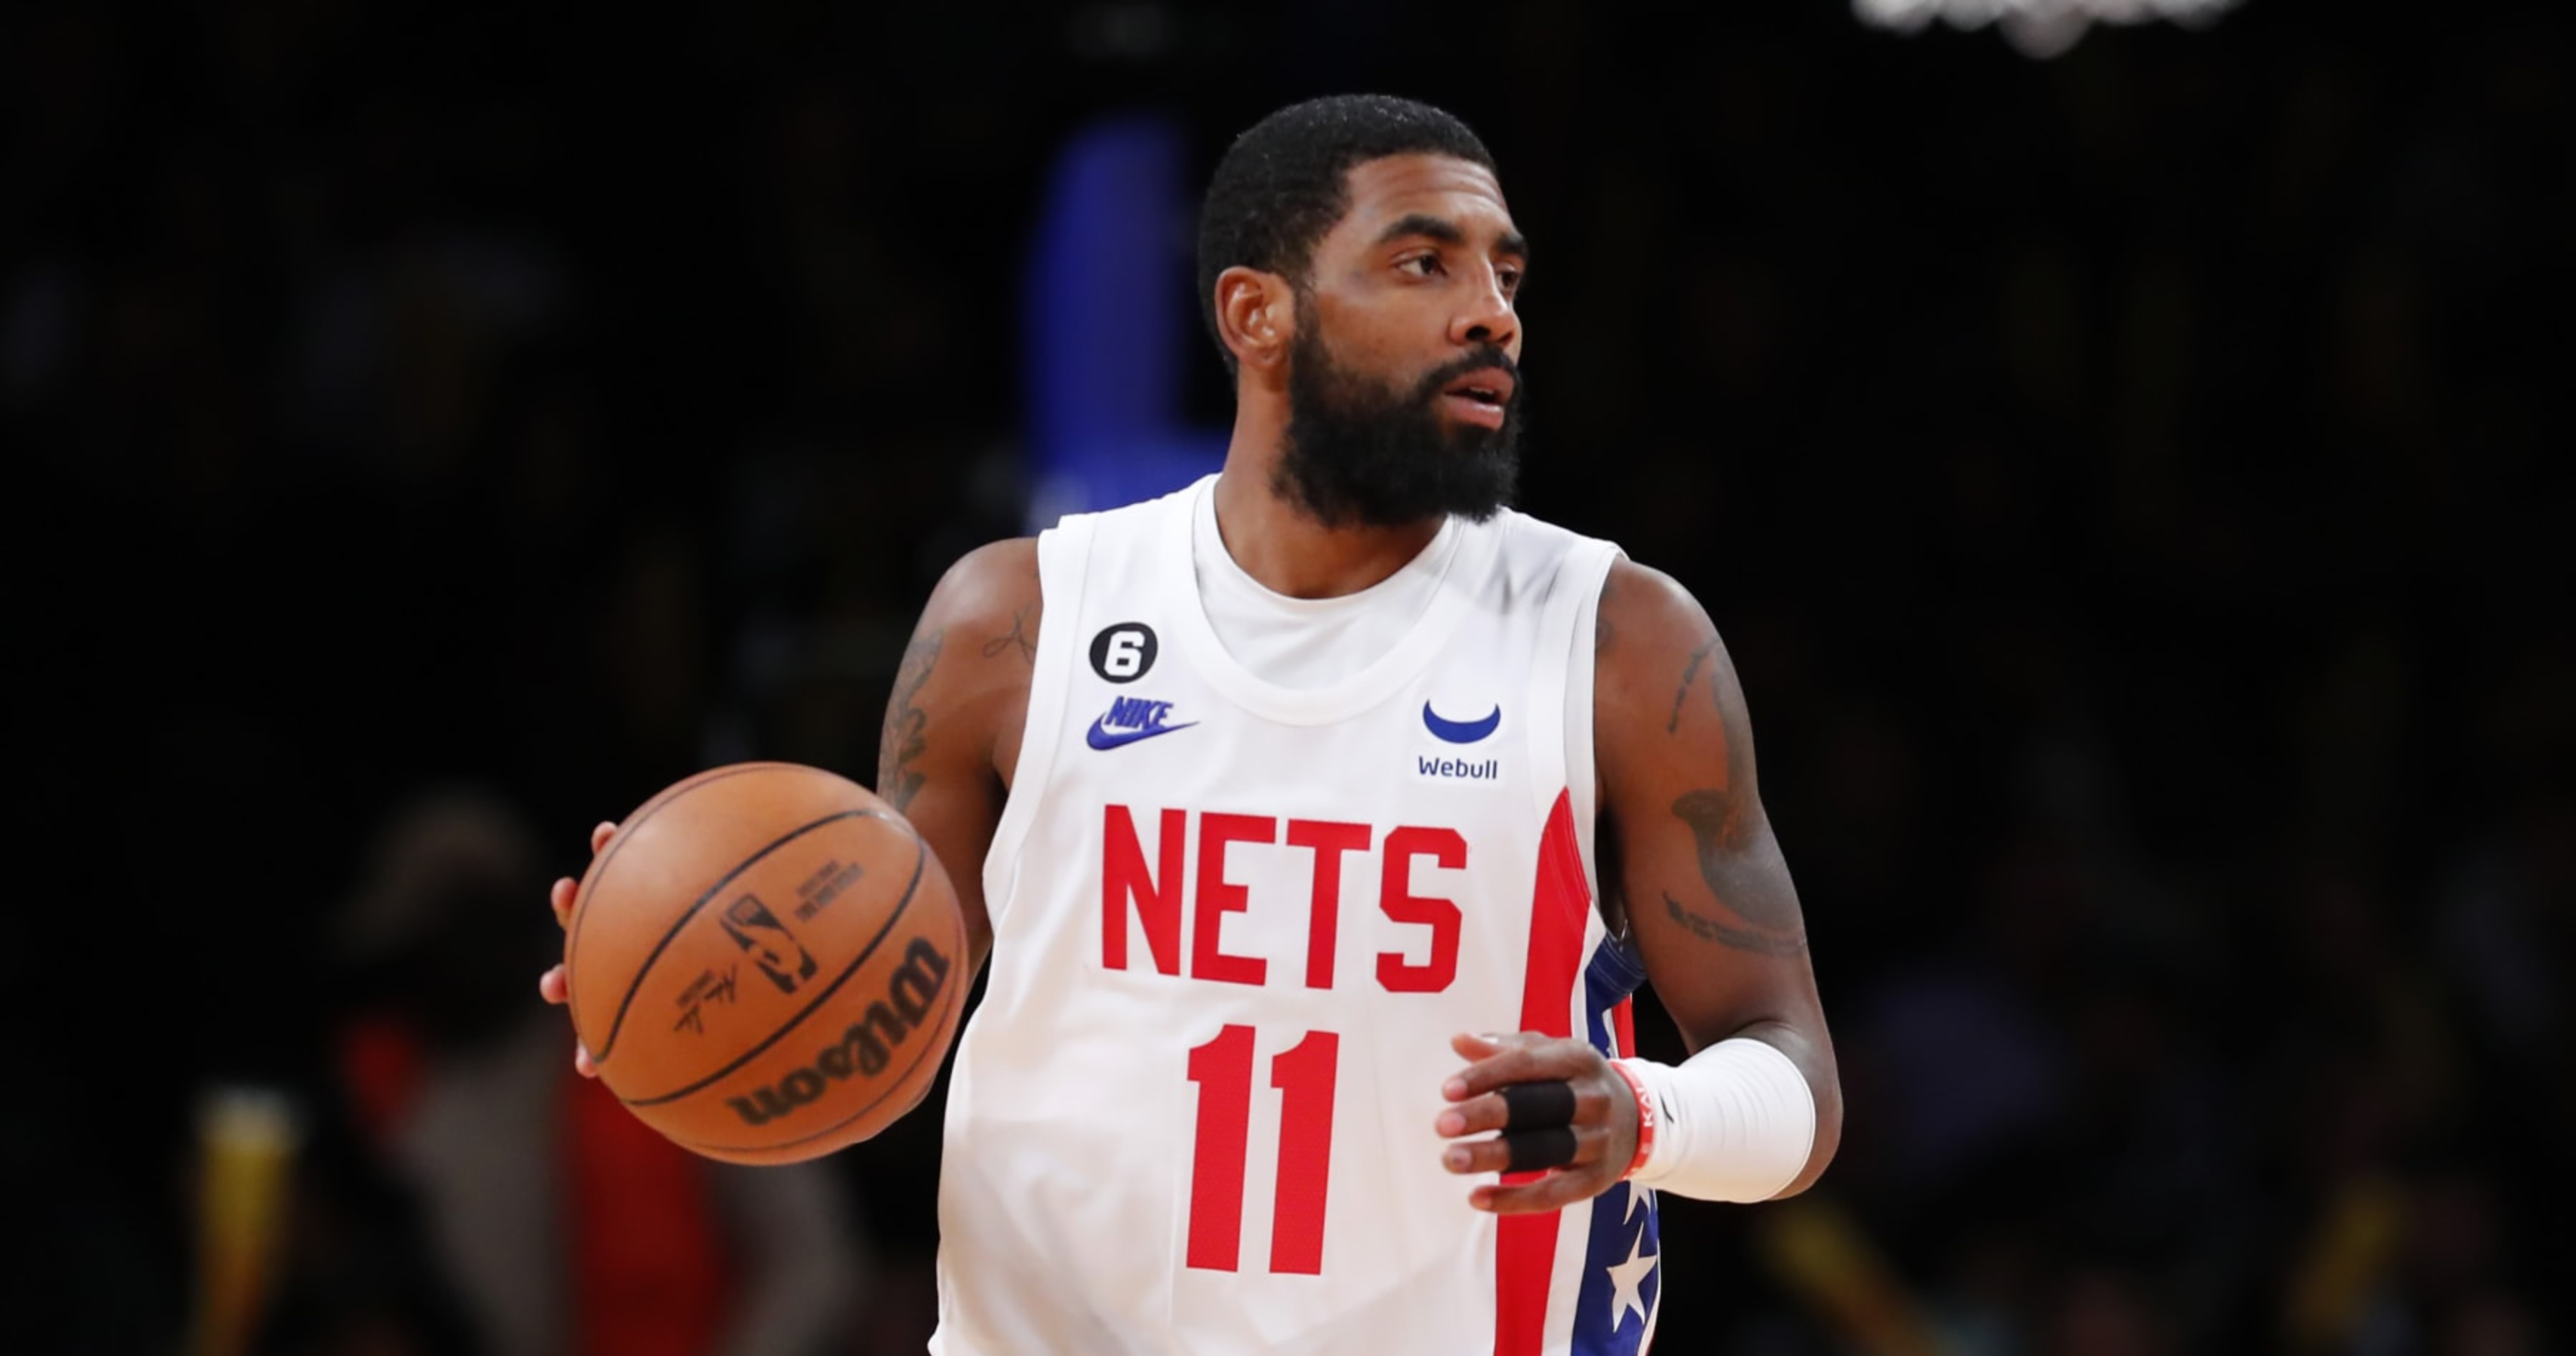 Nets GM Didn't Consider Waiving Kyrie Irving After He Promoted Antisemitic Movie